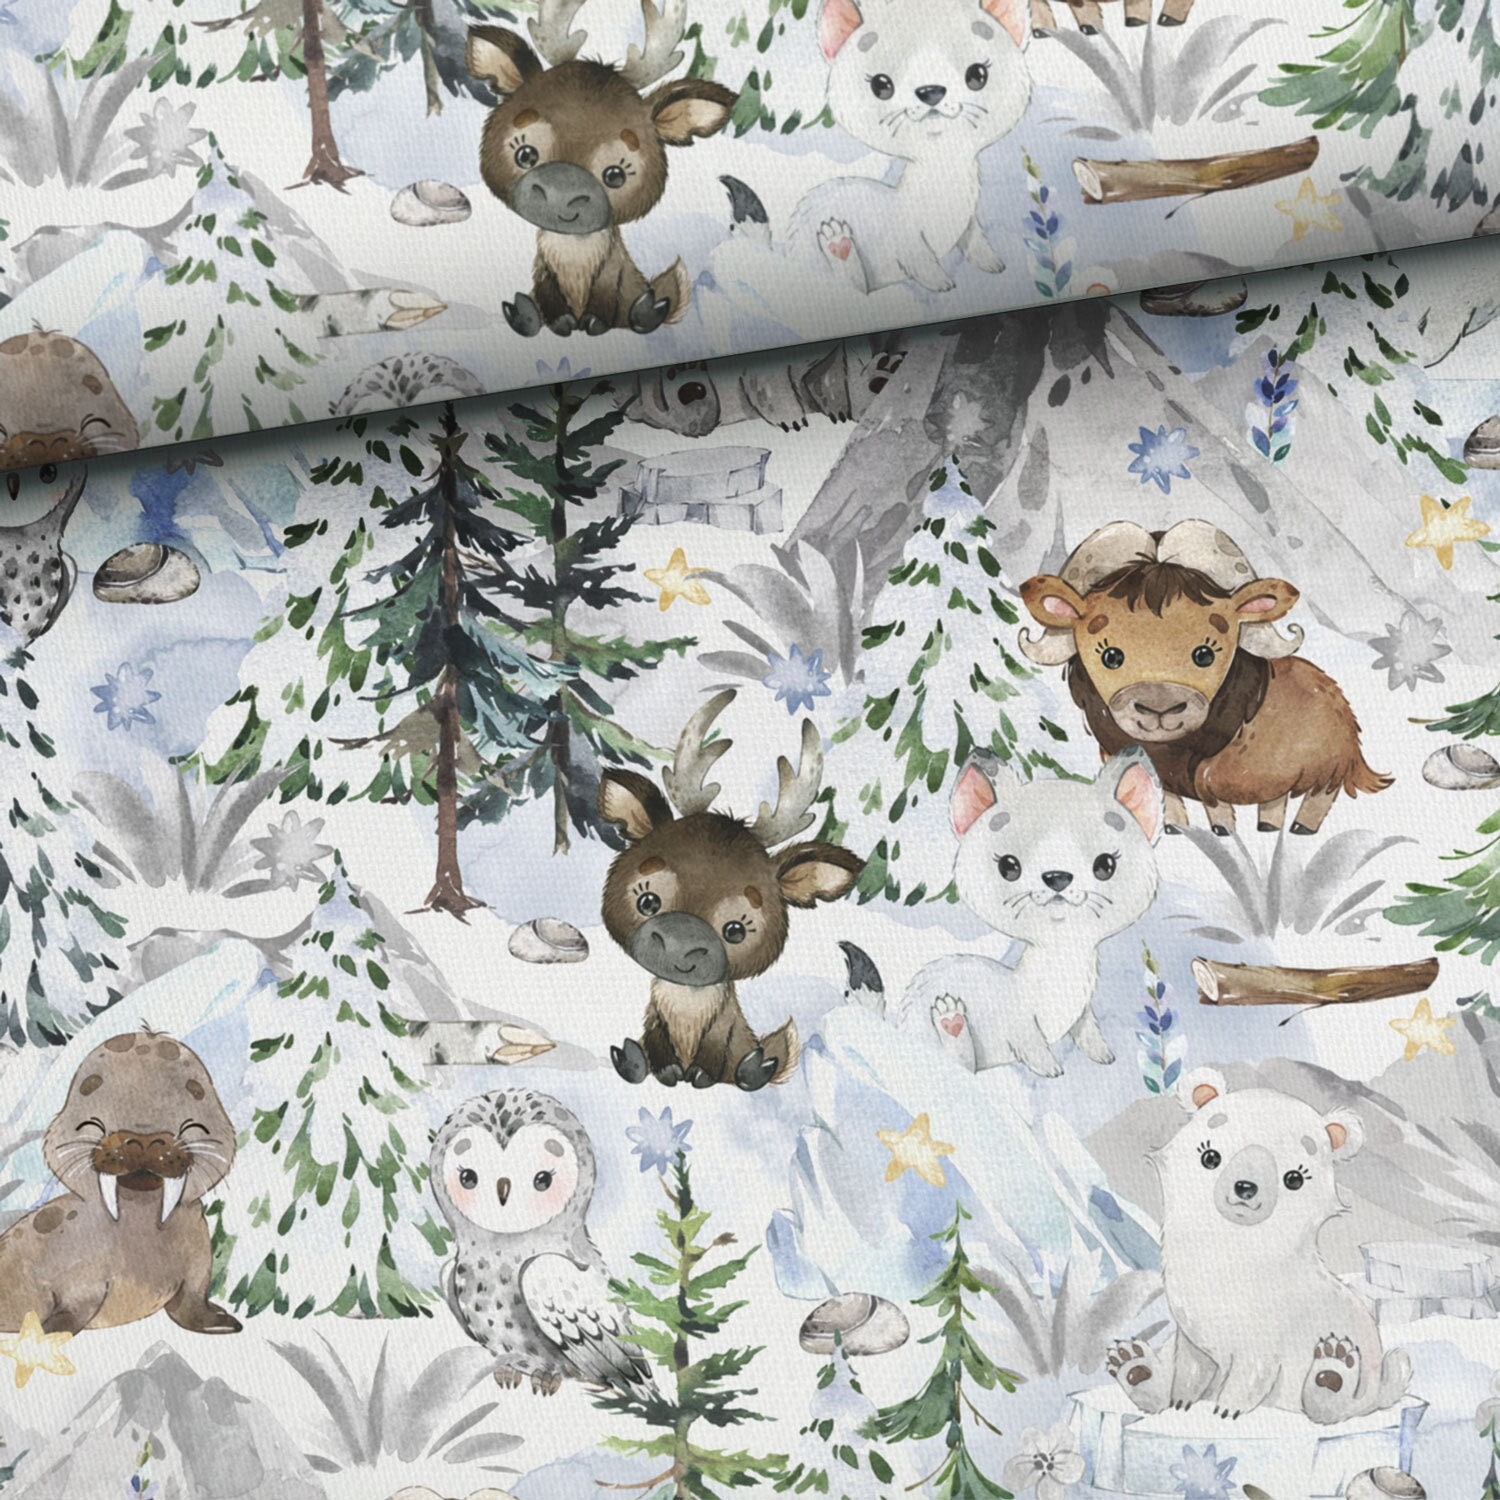 Baby animals fabric by the yard, squirrel in forest print, quilting cotton  with fox, raccoon sewing fabric, nature trail fabric